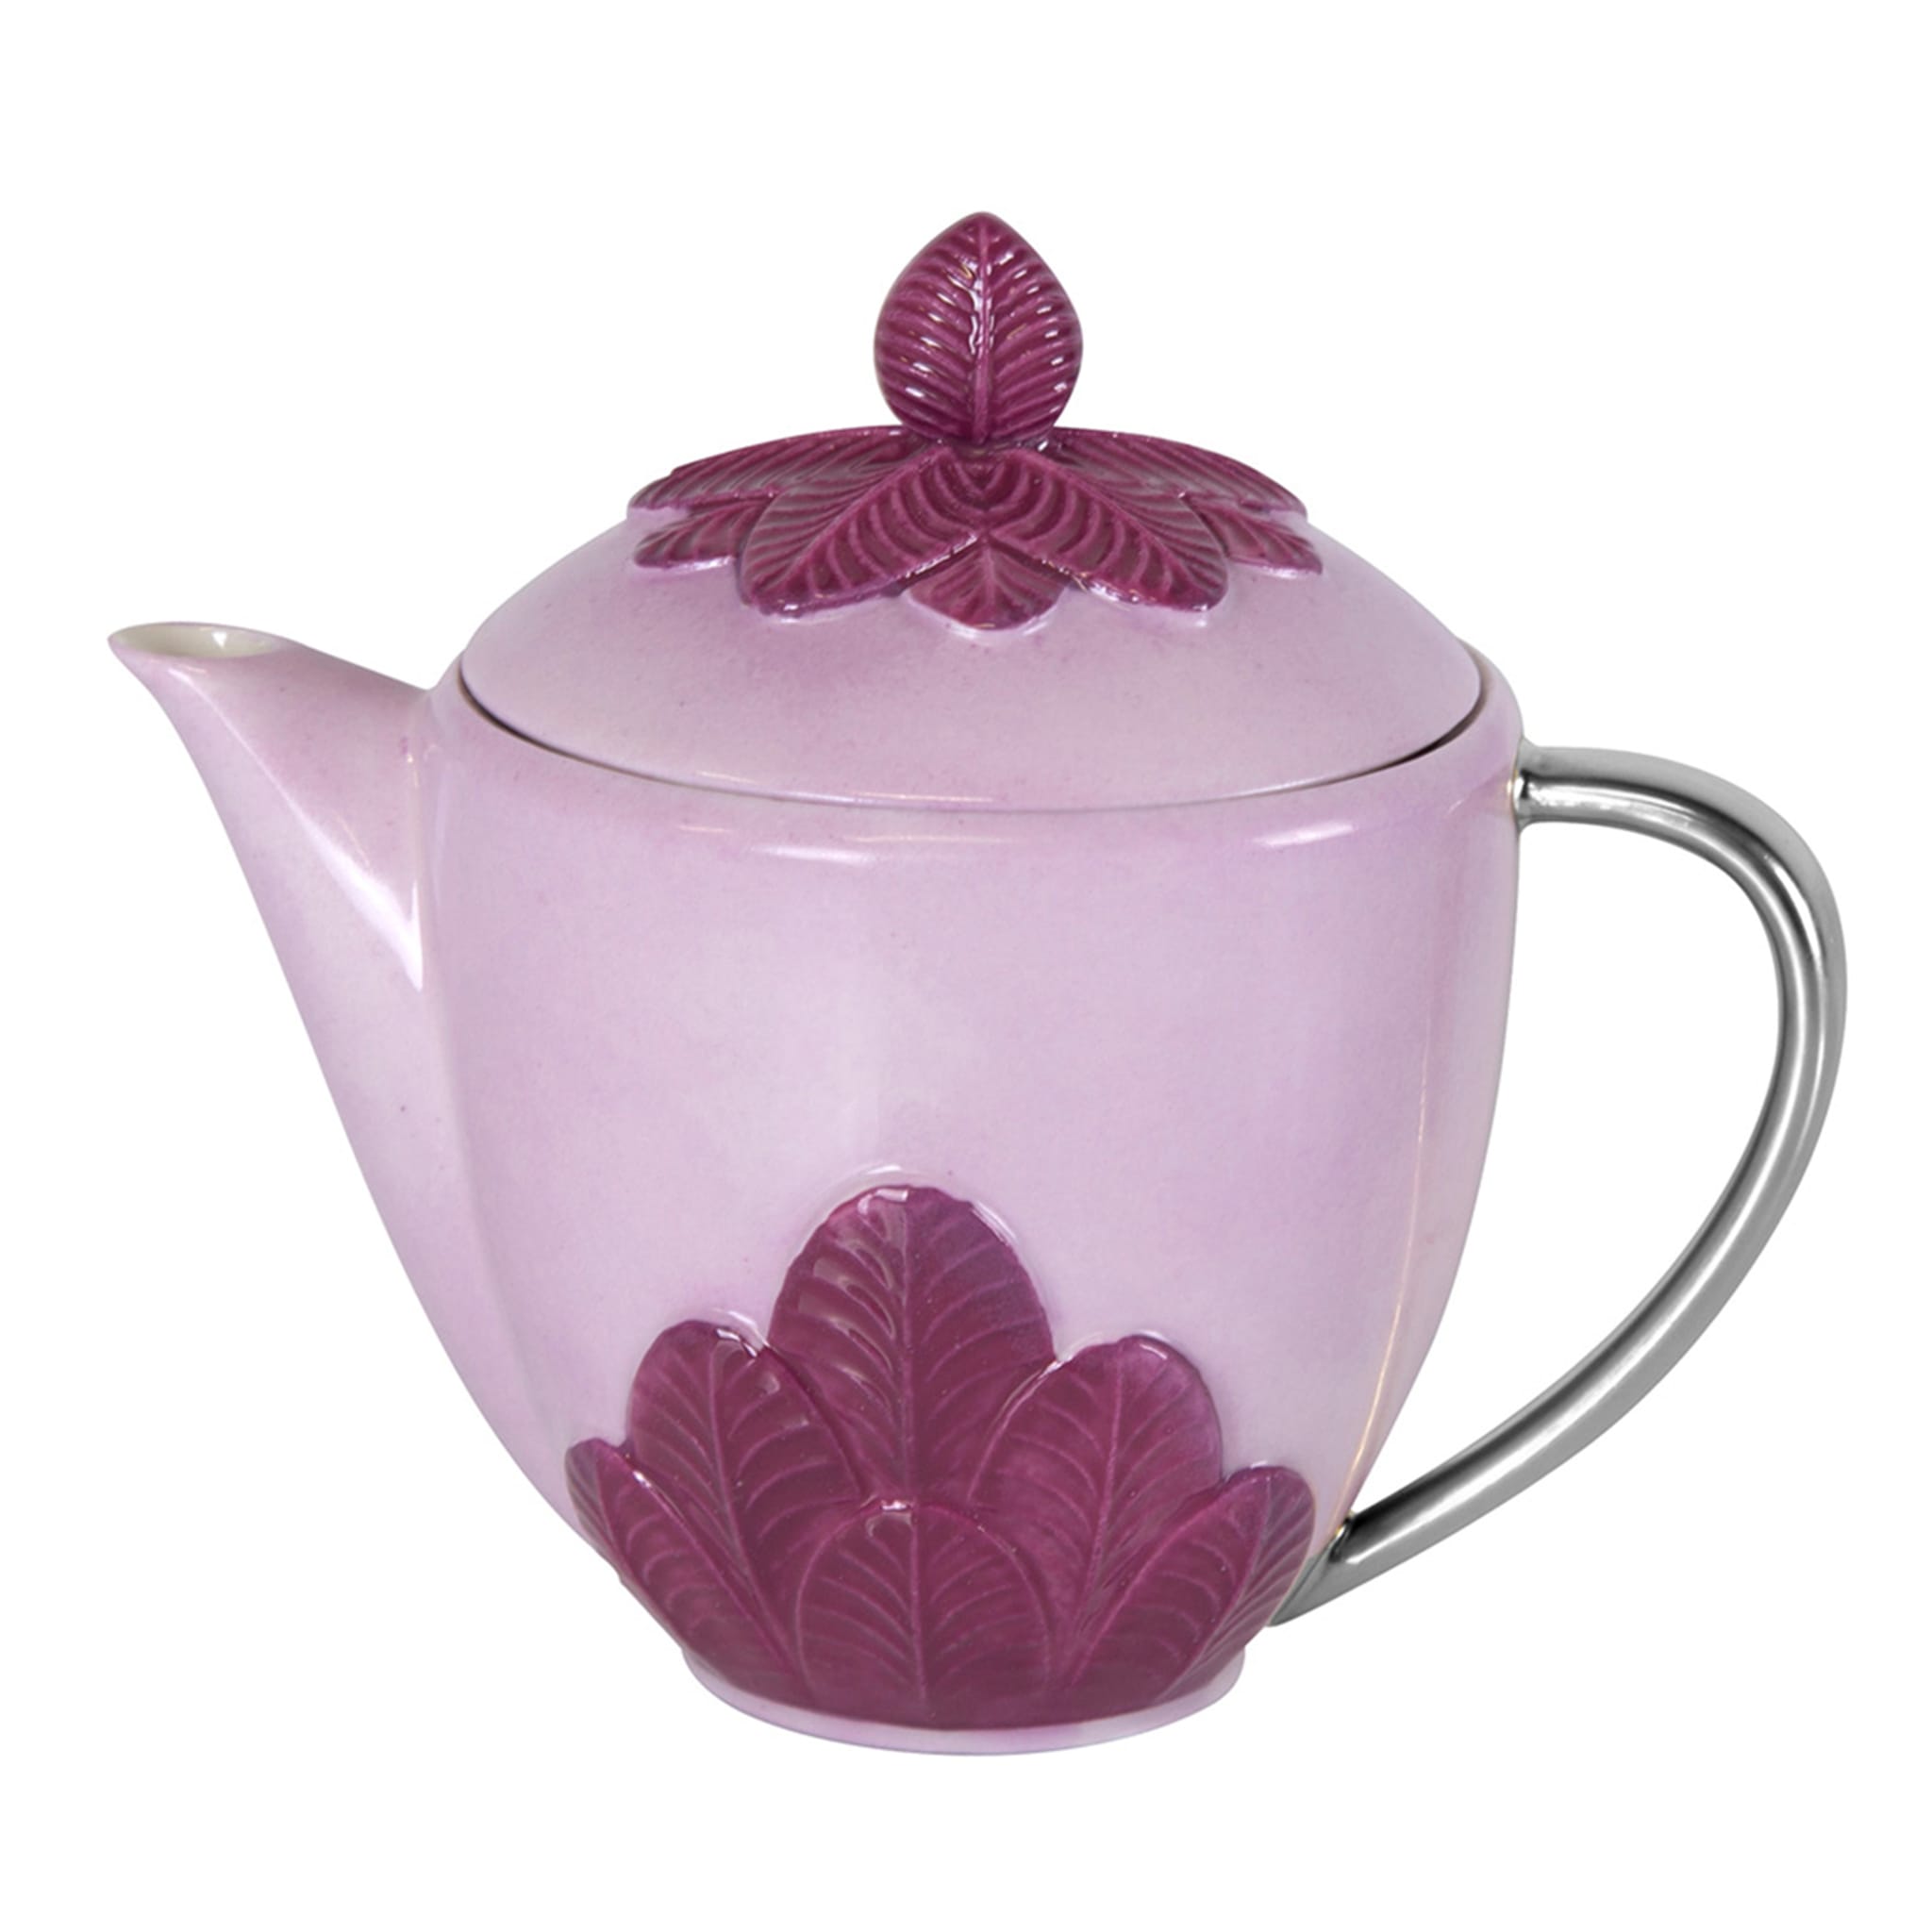 PEACOCK CREAMER - PURPLE AND SILVER - Main view